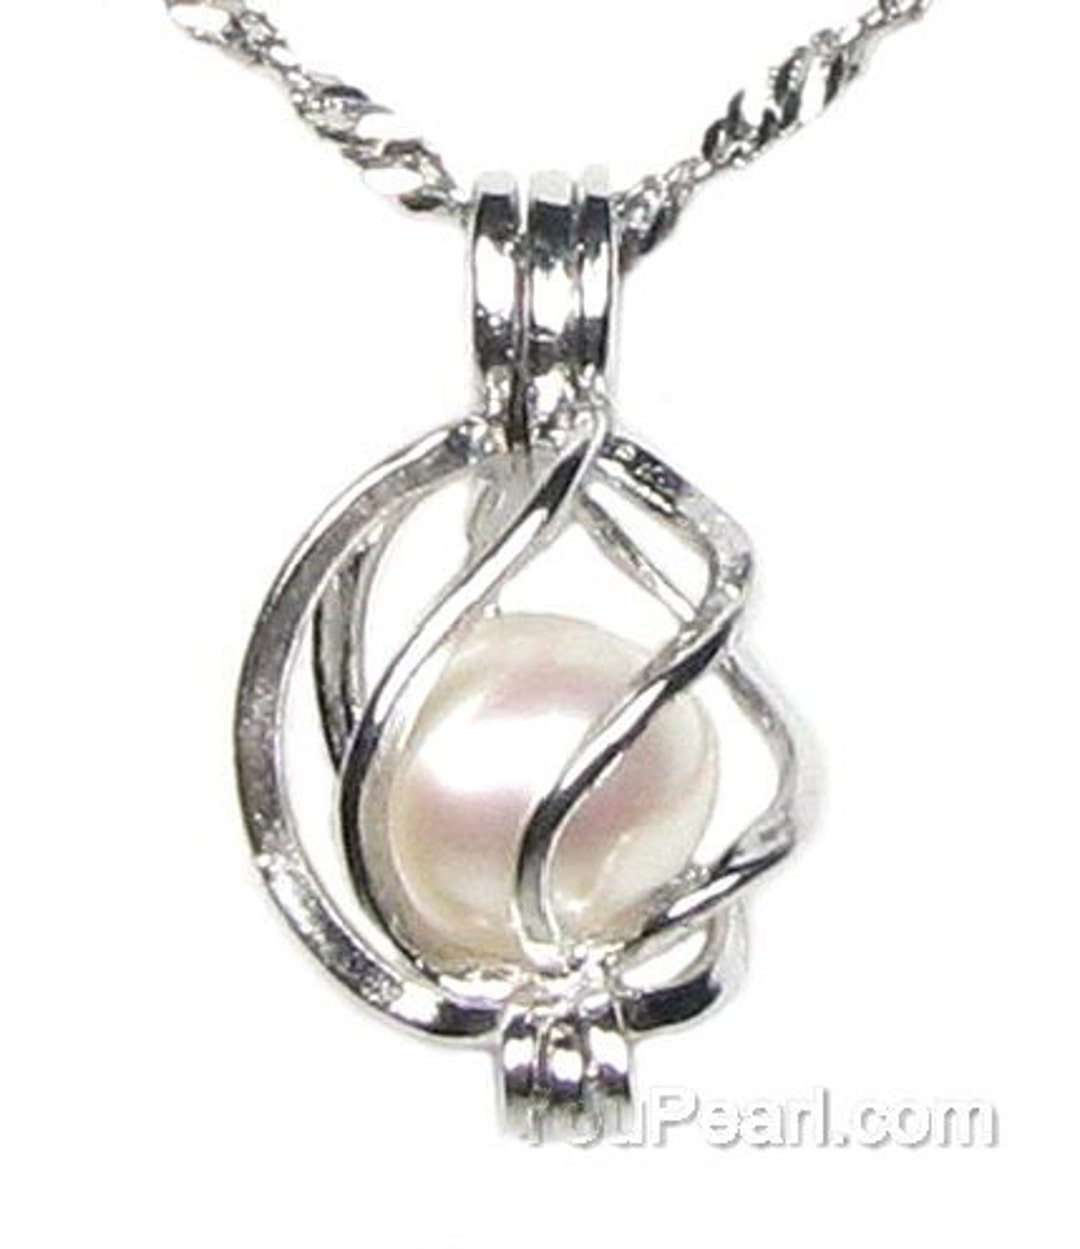  Lotus and freshwater pearl cage necklace in silver stainless  steel-hypoallergenic for sensitive skin, Handmade in Hawaii Beach Jewelry :  Handmade Products